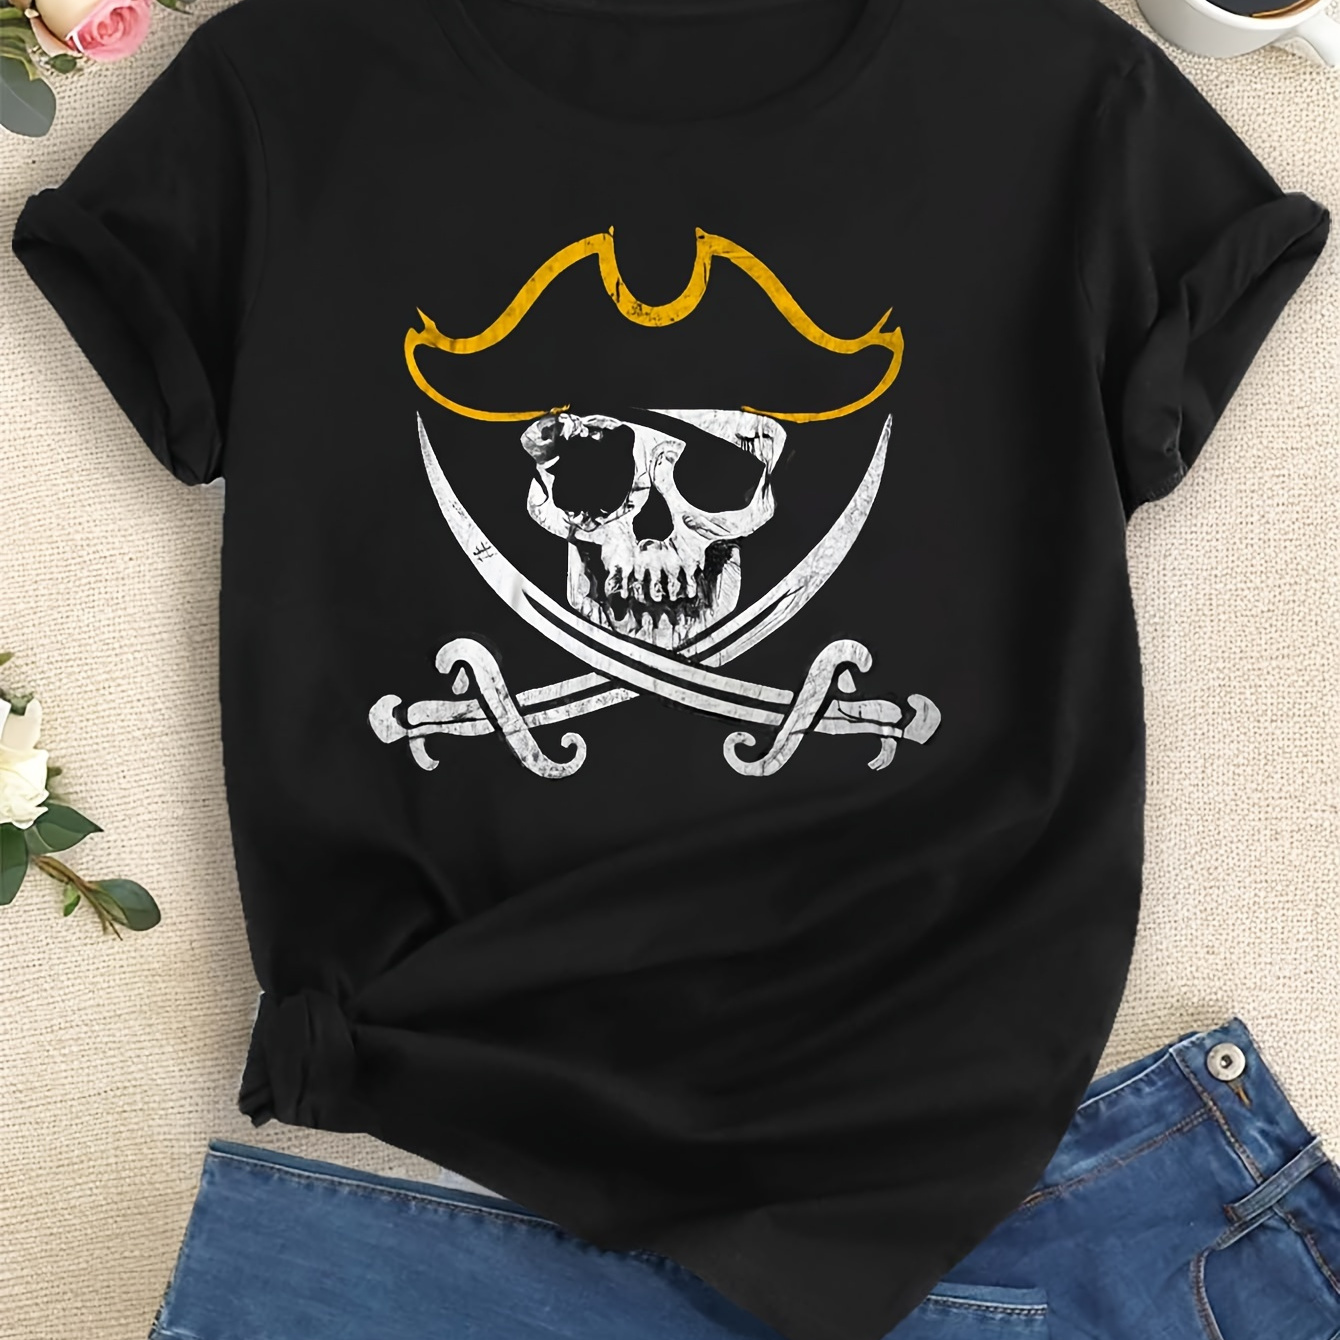 

Pattern For Pirate Ship Print T-shirt, Short Sleeve Crew Neck Casual Top For Summer & Spring, Women's Clothing